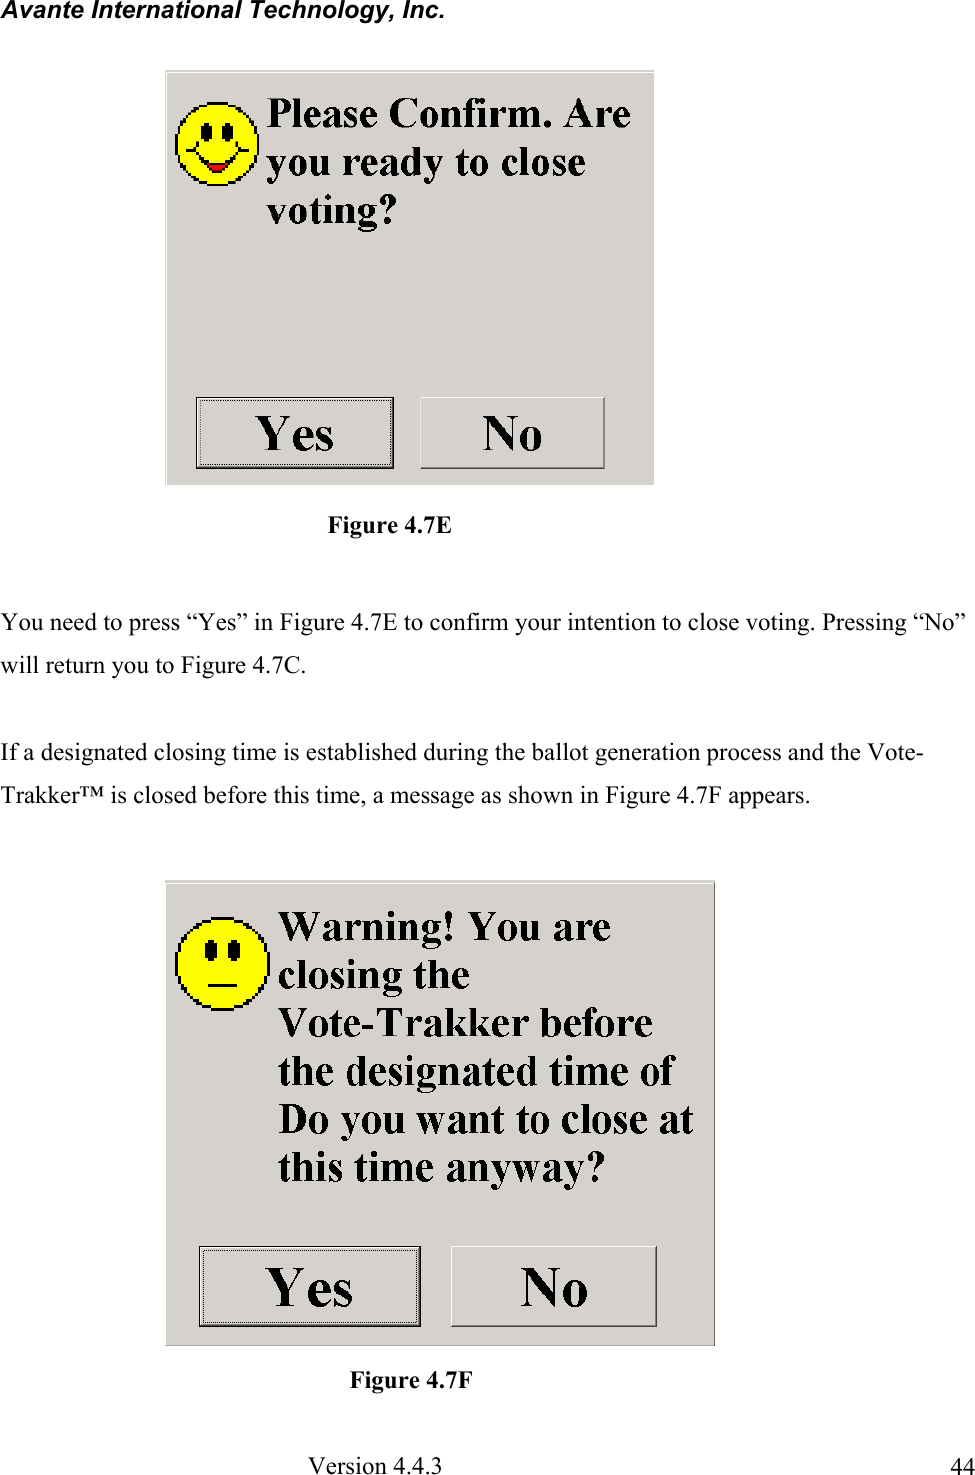 Avante International Technology, Inc.  Version 4.4.3  44 You need to press “Yes” in Figure 4.7E to confirm your intention to close voting. Pressing “No” will return you to Figure 4.7C.  If a designated closing time is established during the ballot generation process and the Vote-Trakker™ is closed before this time, a message as shown in Figure 4.7F appears.               Figure 4.7E                Figure 4.7F 